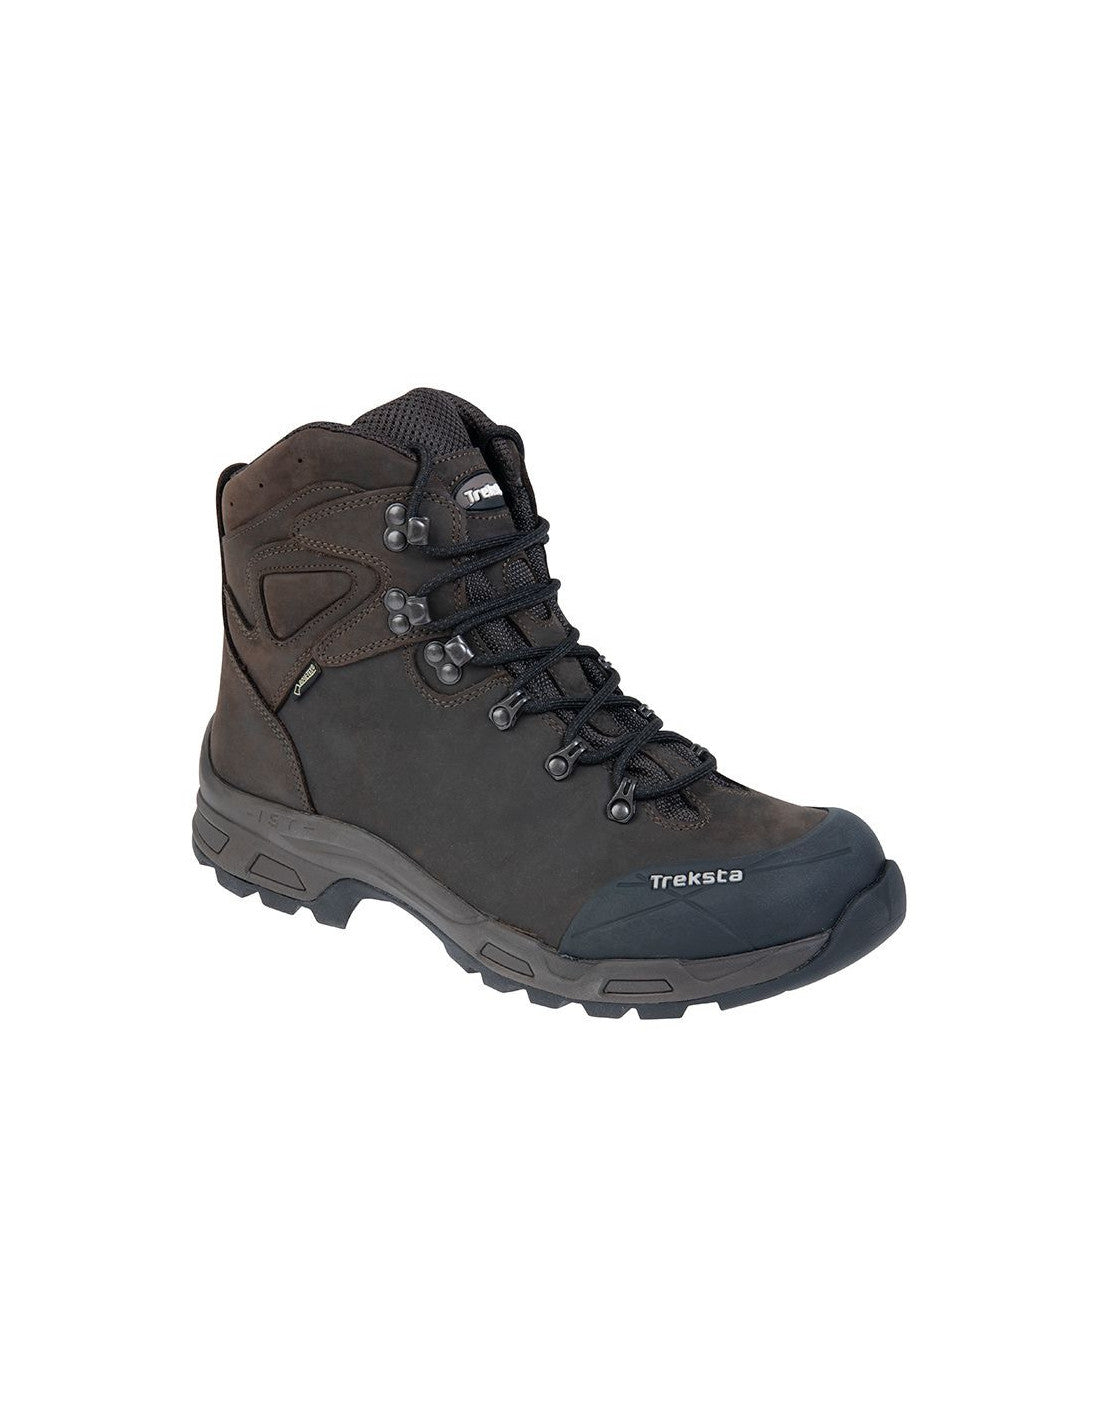 X-Mountain hunting boots